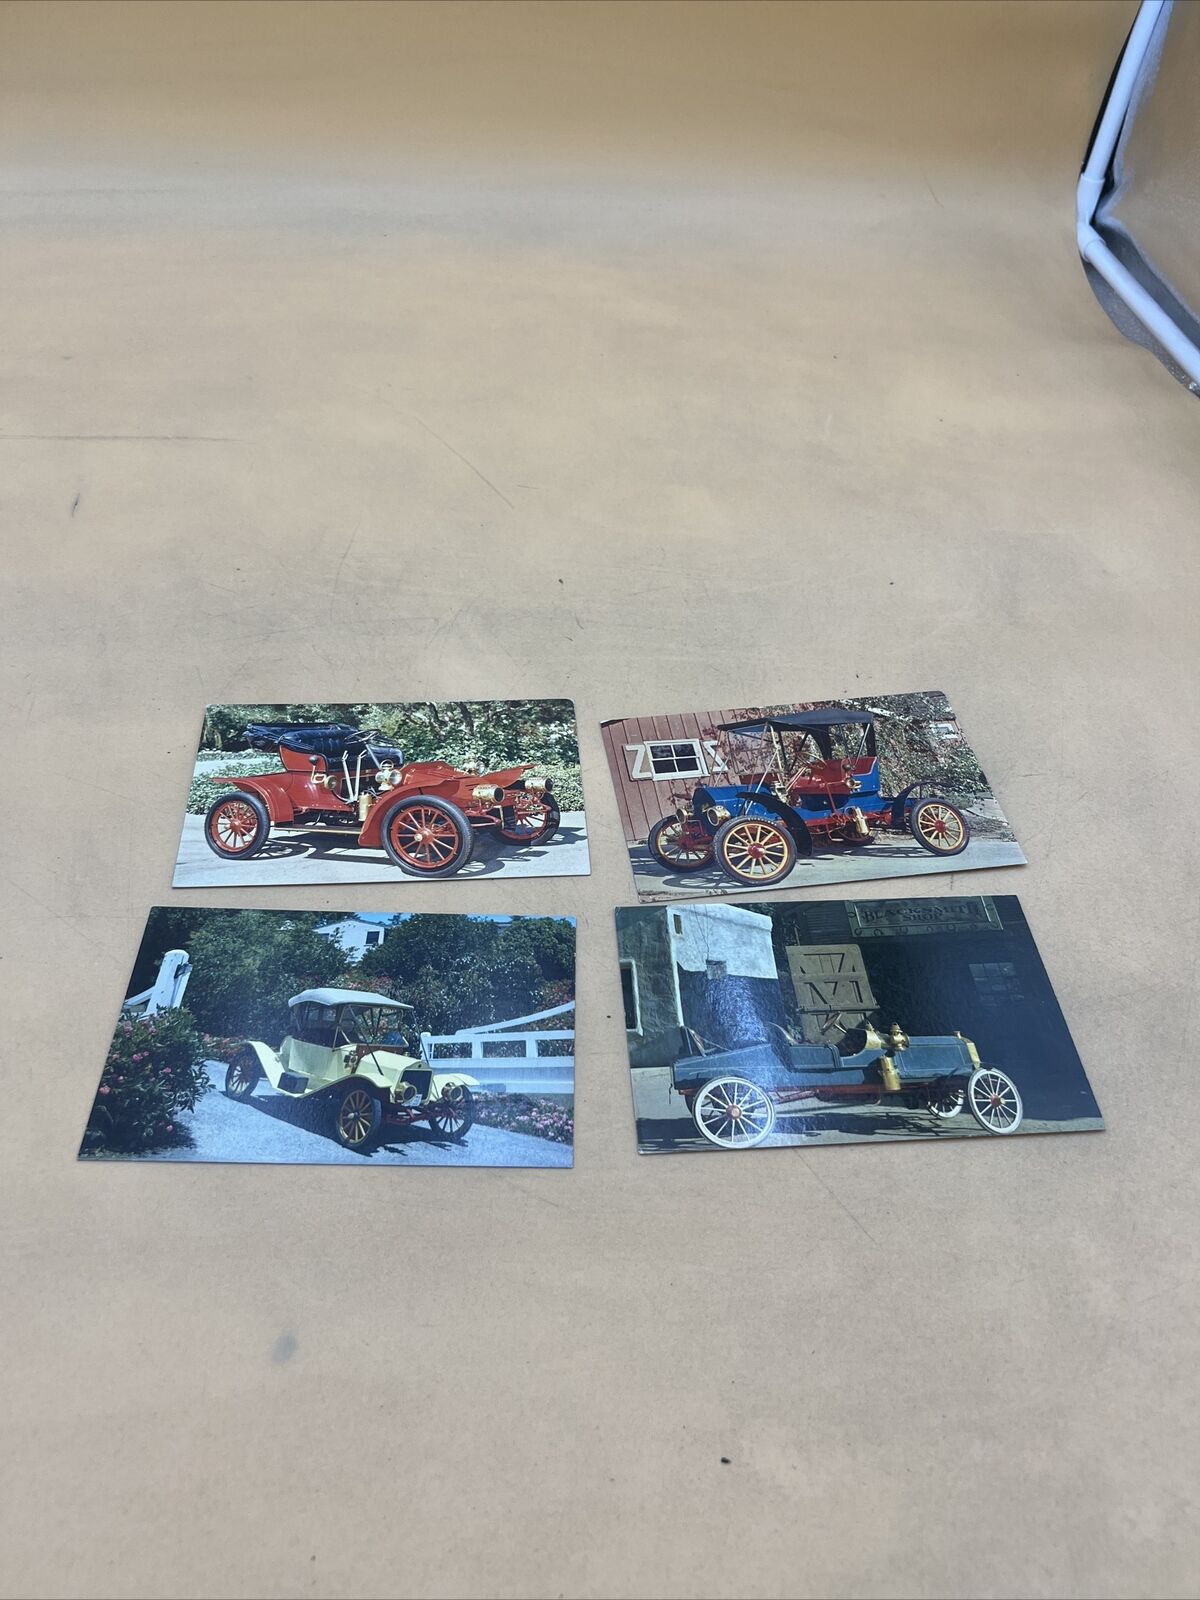 1903 MITCHELL 1906 AUTOCAR ROADSTER 1912 BRUSH AND FLANDERS POSTCARDS SET